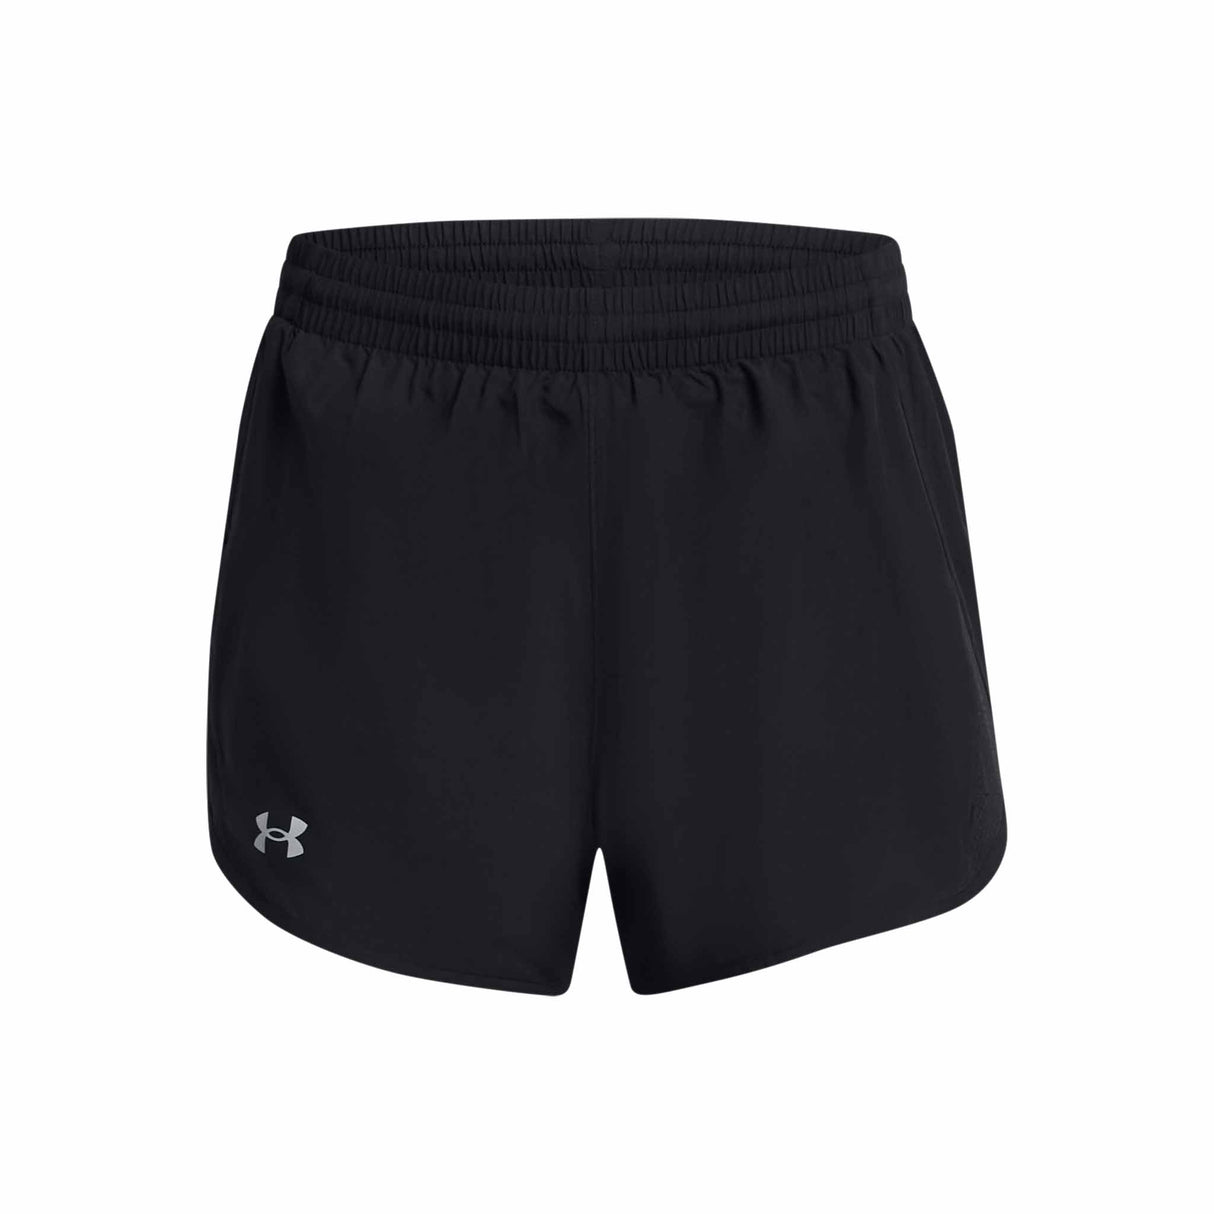 Under Armour Fly-By 2-en-1 shorts femme - Black / Reflective